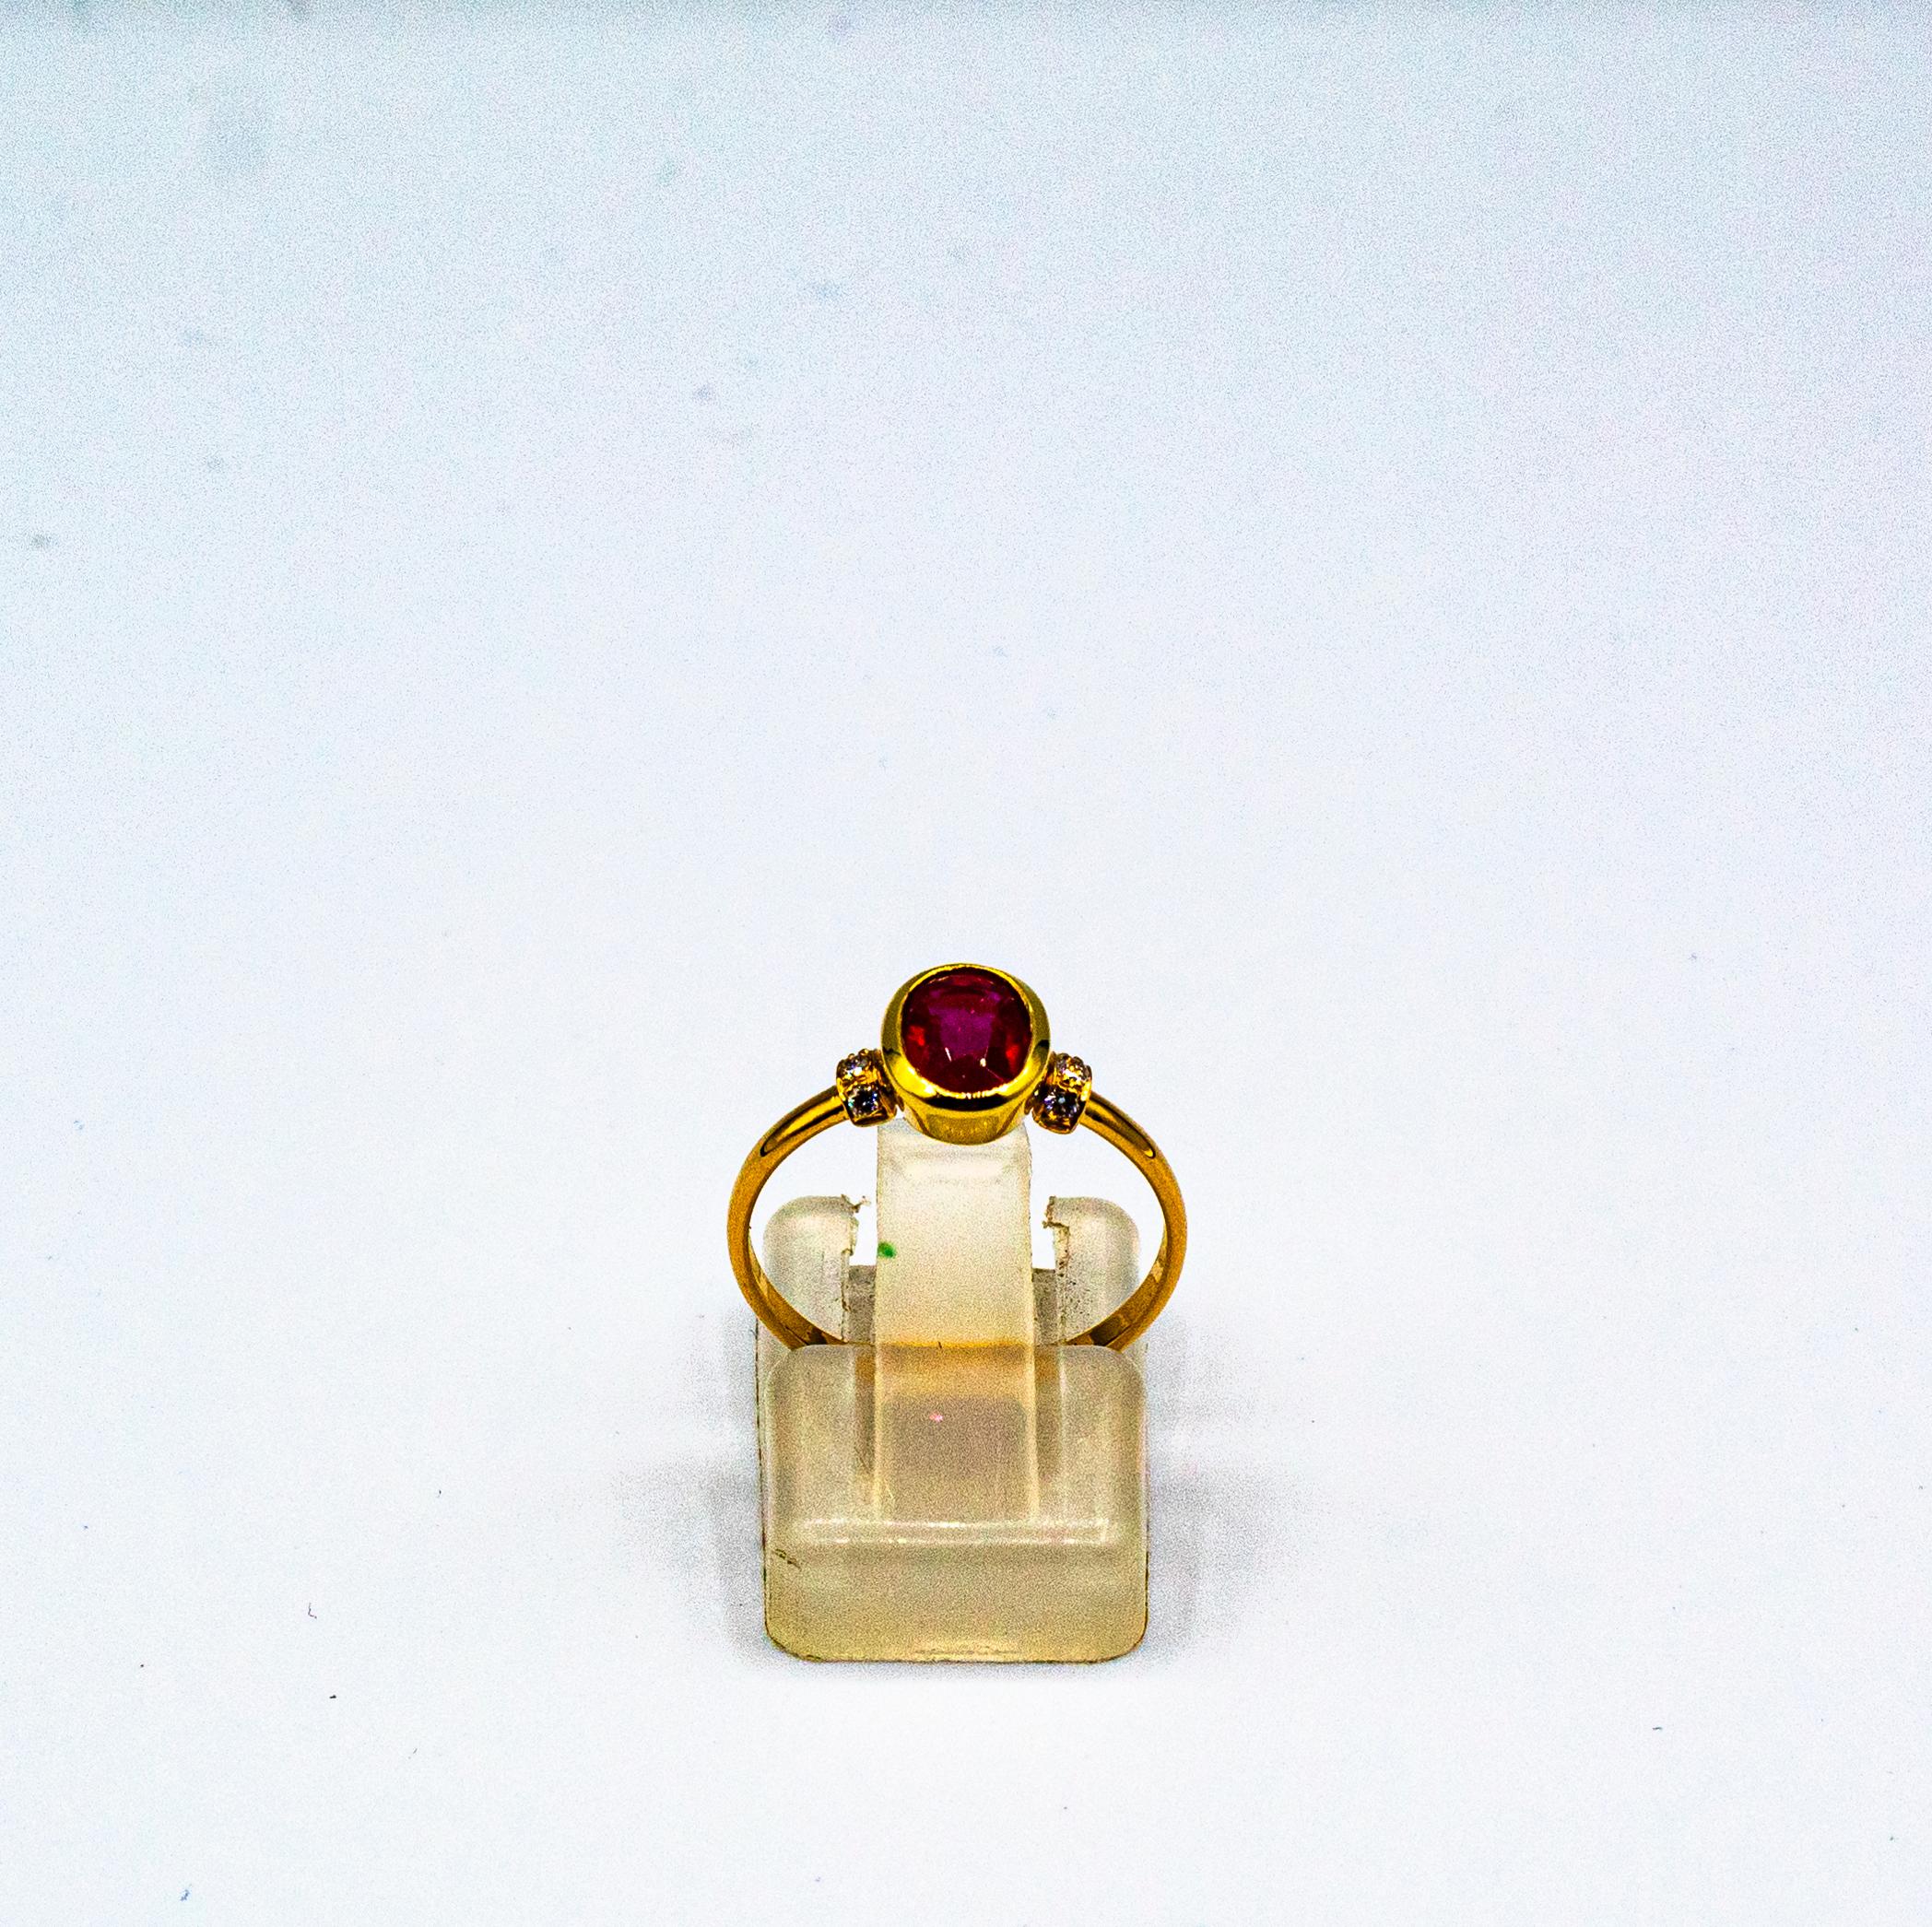 This Ring is made of Sterling Silver with a Yellow Gold Plate.
This Ring has 0.06 Carats of White Brilliant Cut Zircon.
This Ring has a 1.00 Carats Synthetic Oval Cut Ruby.
This Ring is inspired by Art Deco.

Size ITA: 10 USA: 5 1/4

We're a